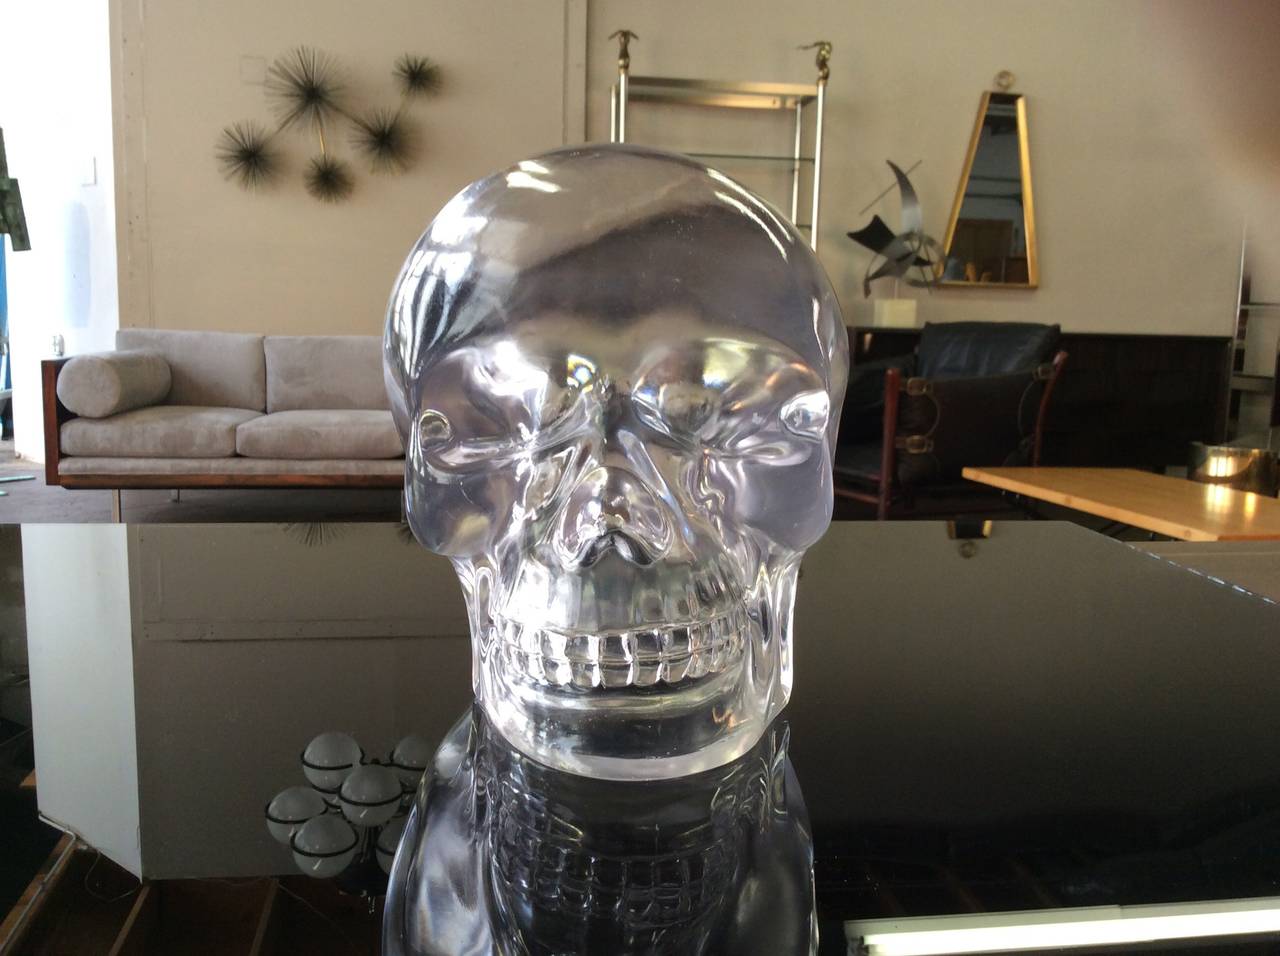 Life-Sized Clear Resin Skull, c1970. Condition is excellent. 

We offer free regular deliveries to NYC and Philadelphia area. Delivery to DC, MD, CT, and MA are available if schedule permits--please message for a location-based delivery